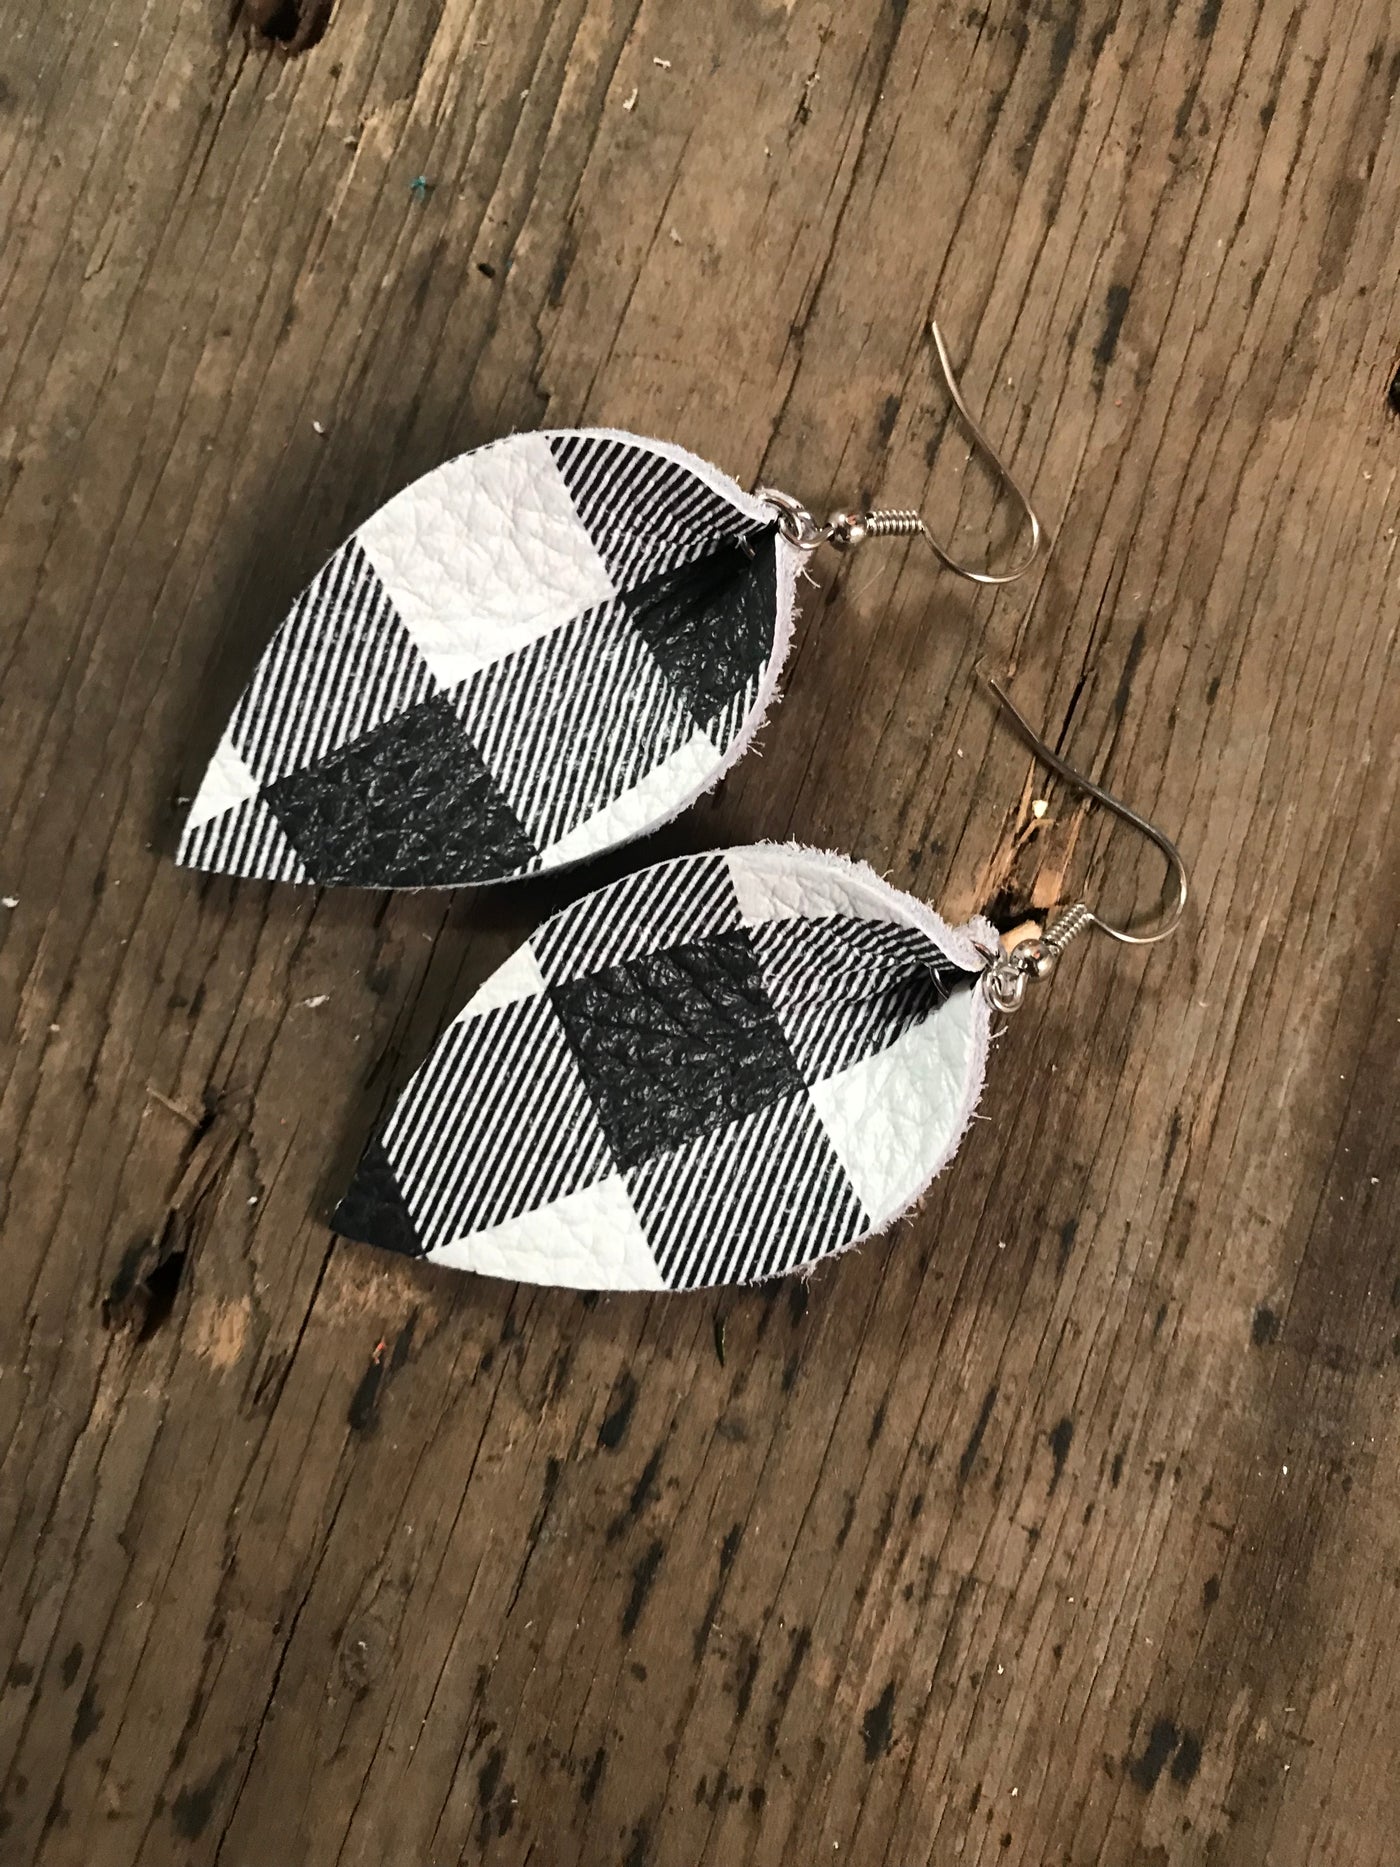 Black and White Buffalo Plaid Earrings - Jill's Jewels | Unique, Handcrafted, Trendy, And Fun Jewelry